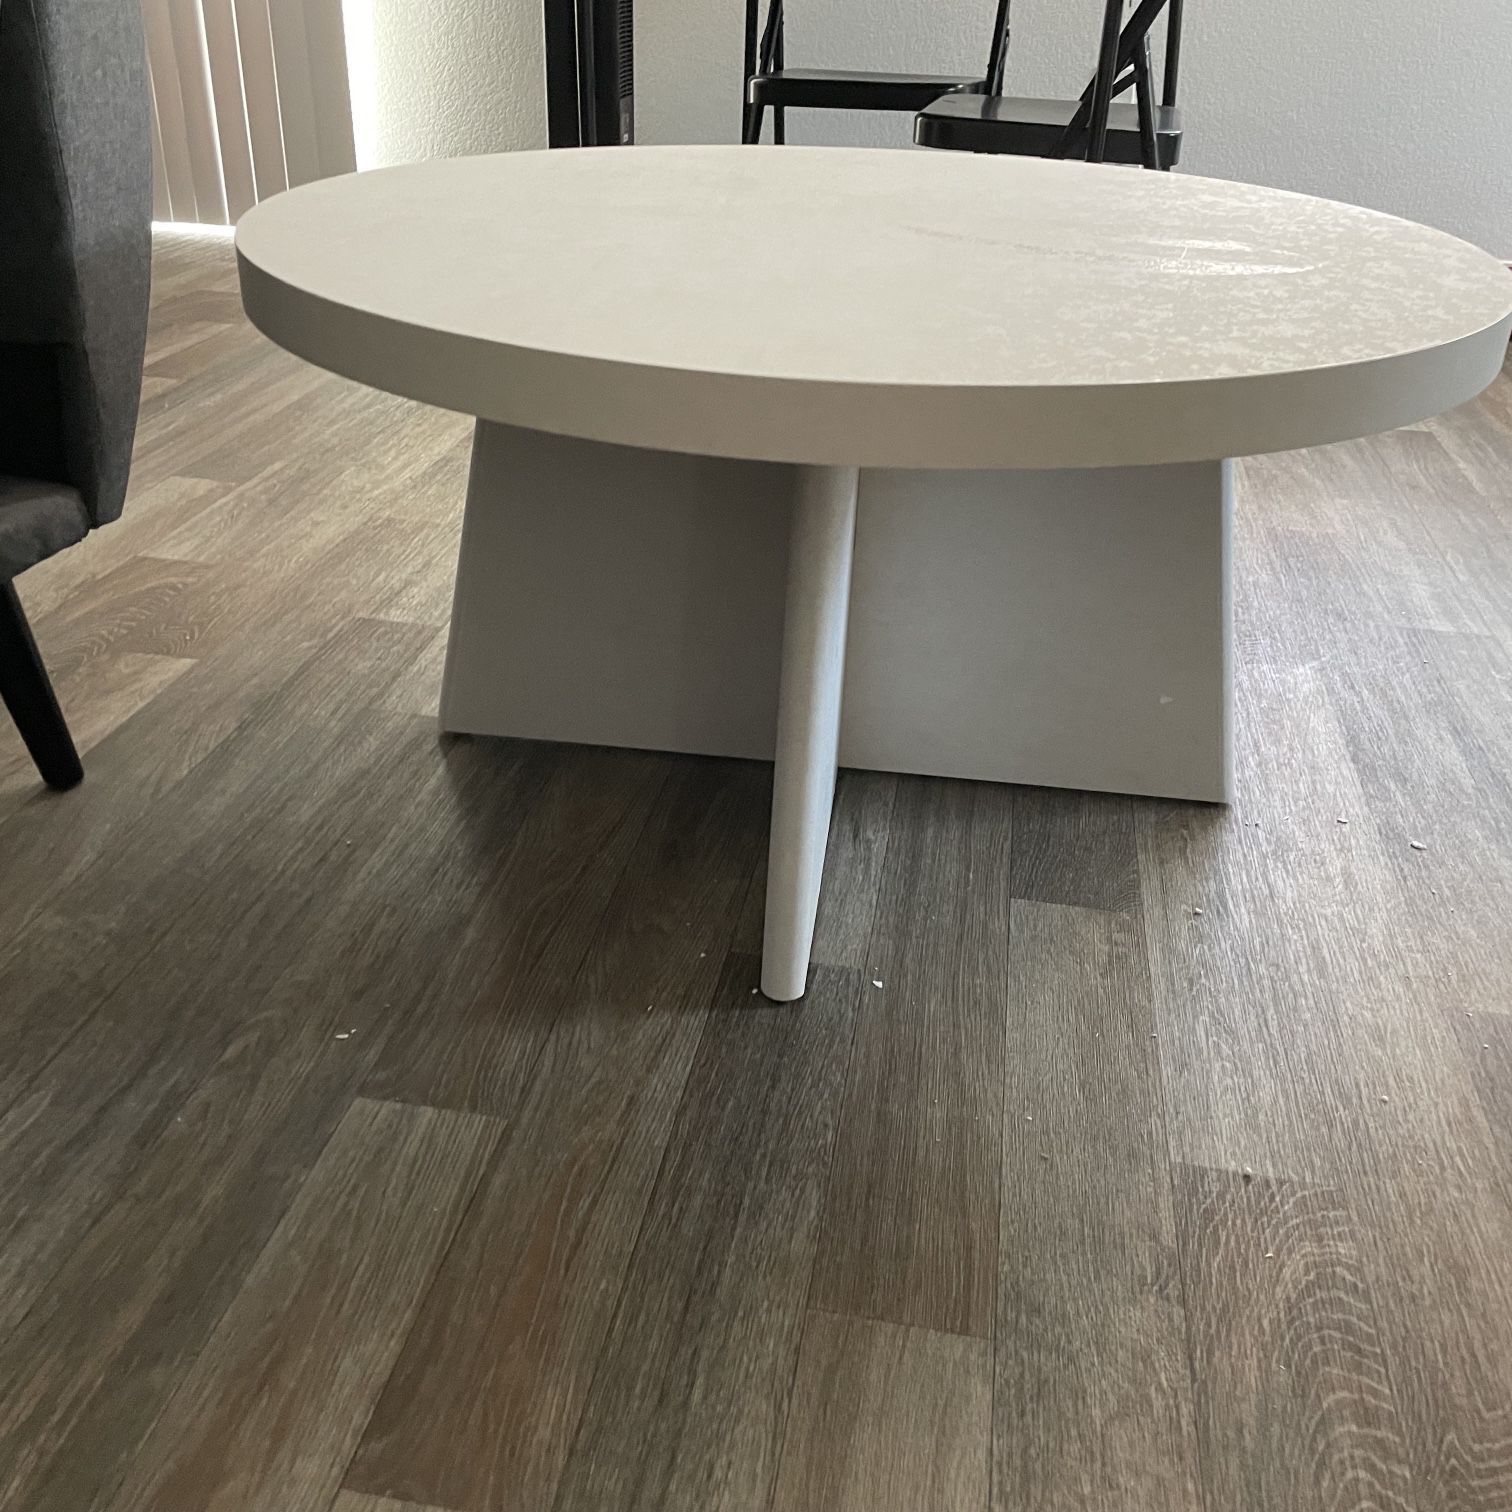 Queer Eye Liam Round Coffee Table For Sale In North Las Vegas, Nv – Offerup Throughout Liam Round Plaster Coffee Tables (View 12 of 15)